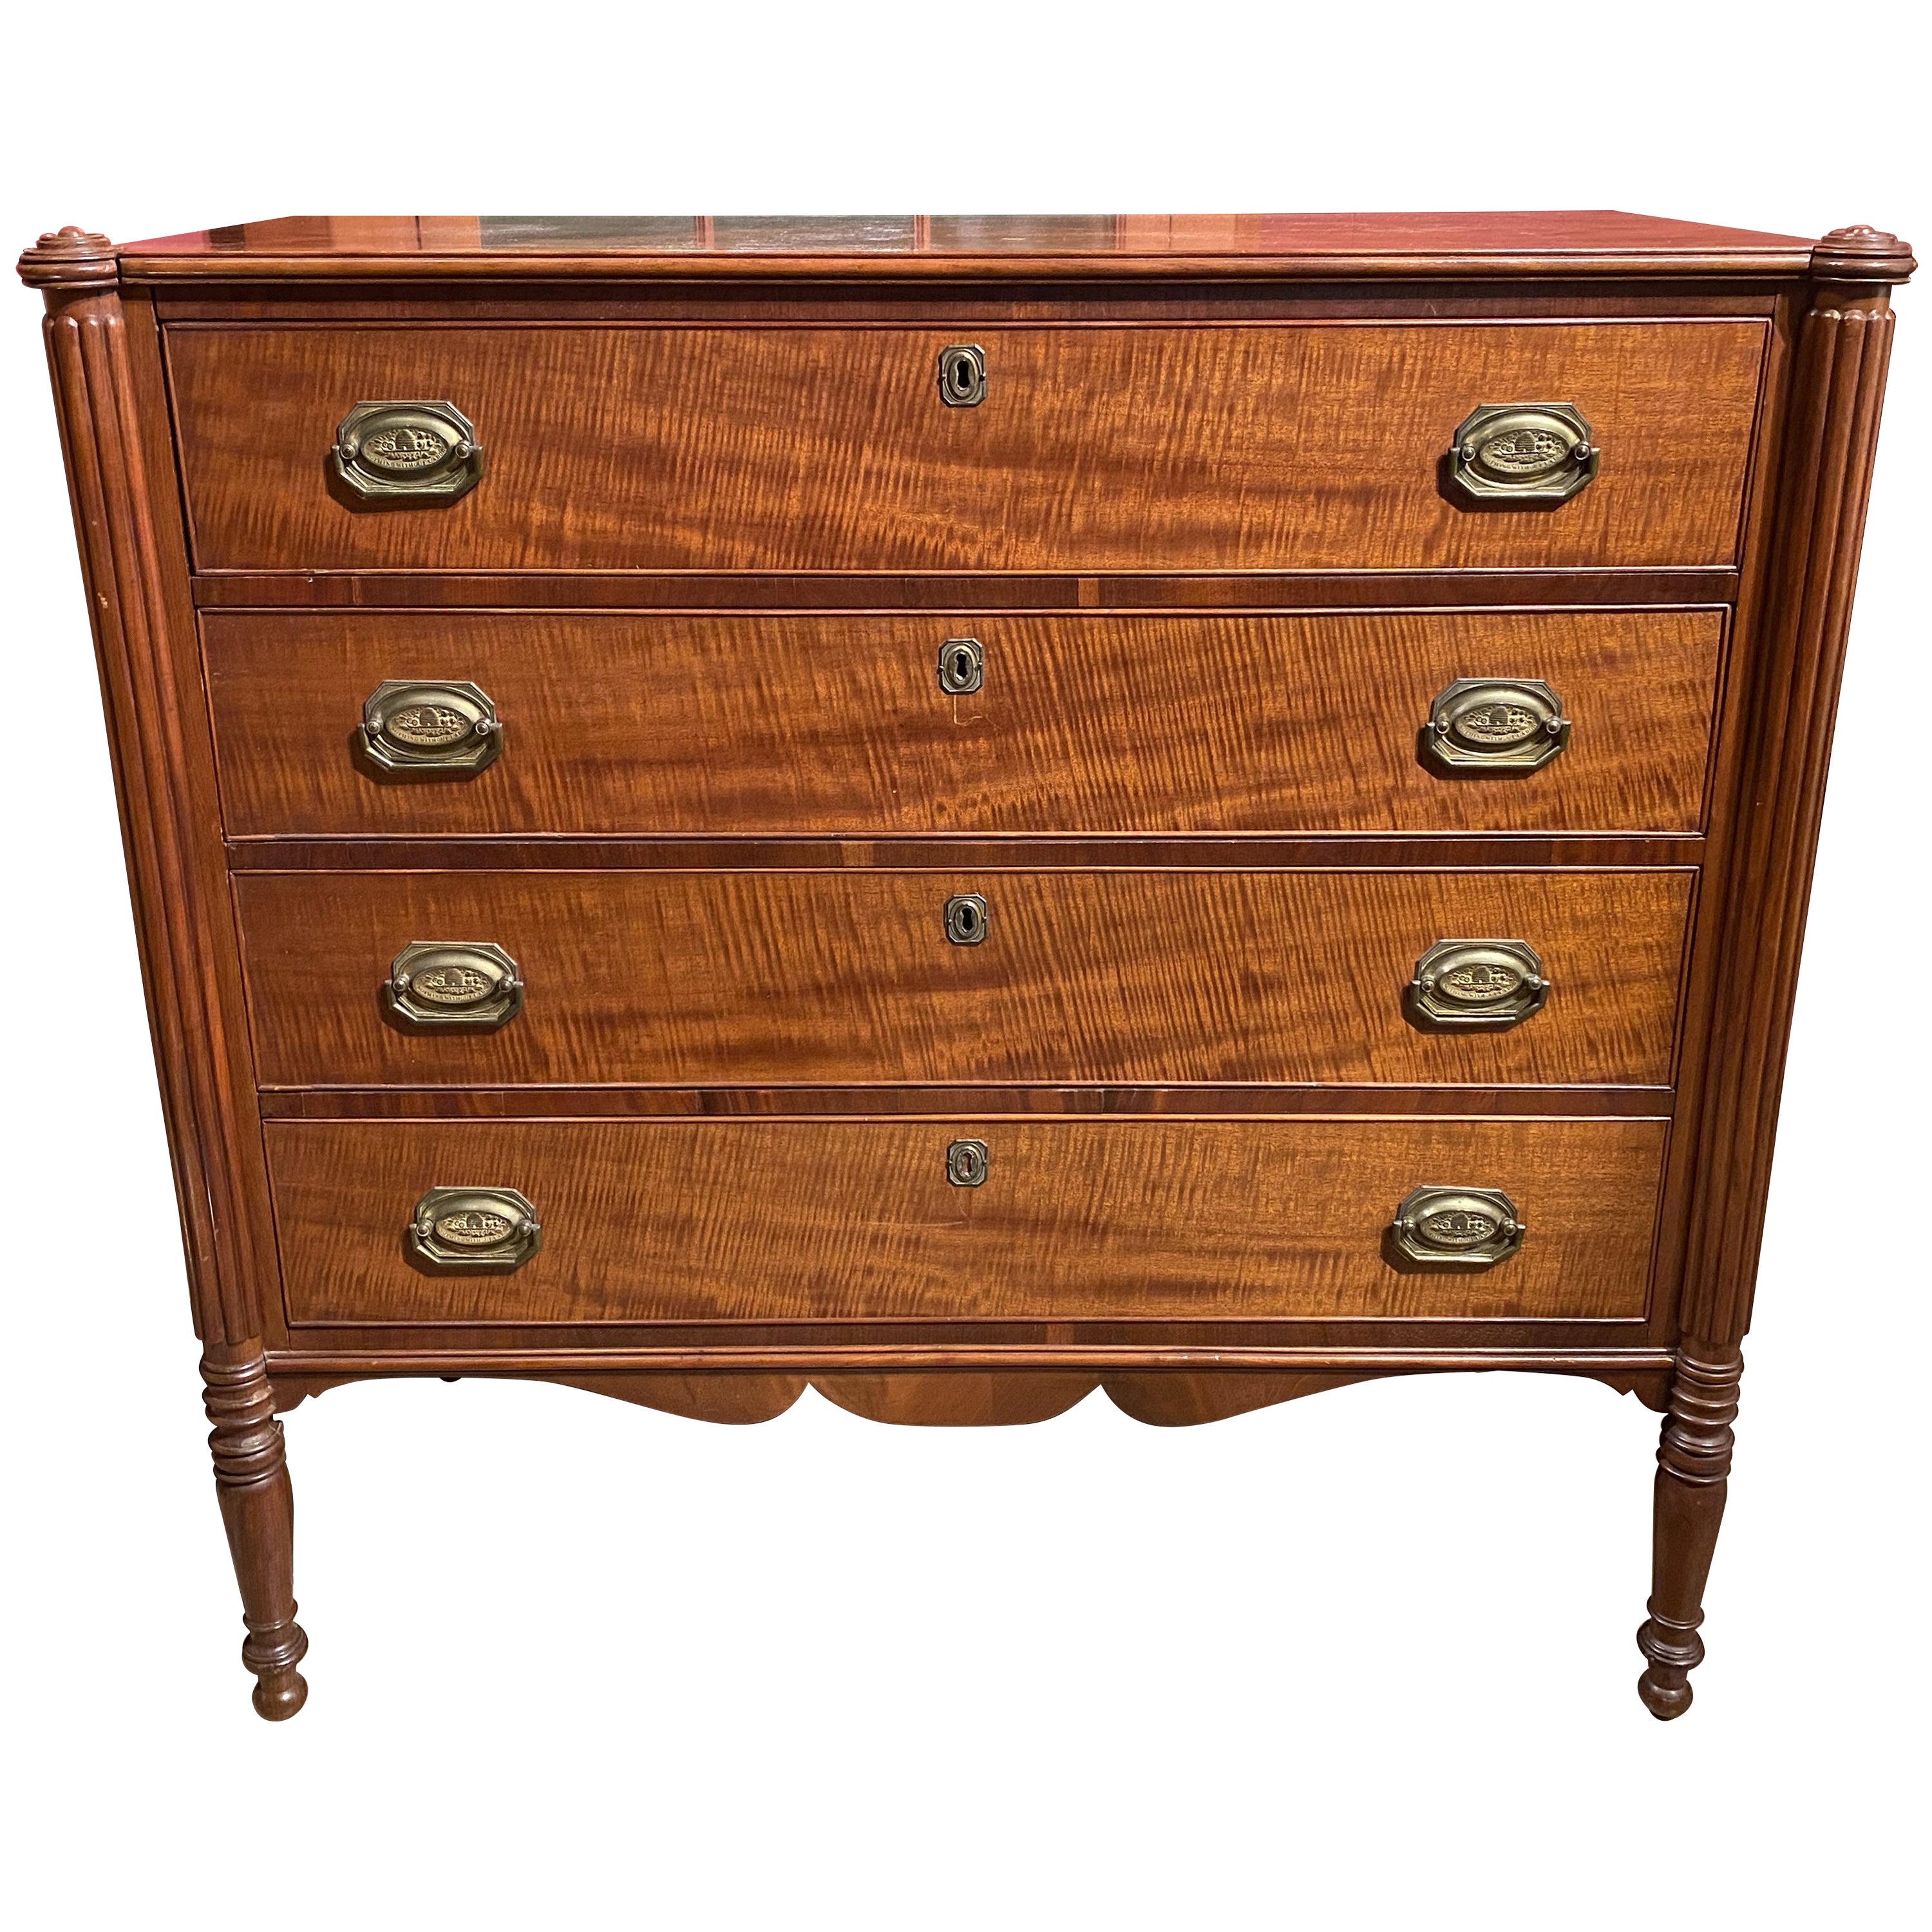 Sheraton Federal Period Cherry, Mahogany & Tiger Maple Chest of Drawers c.1810 For Sale